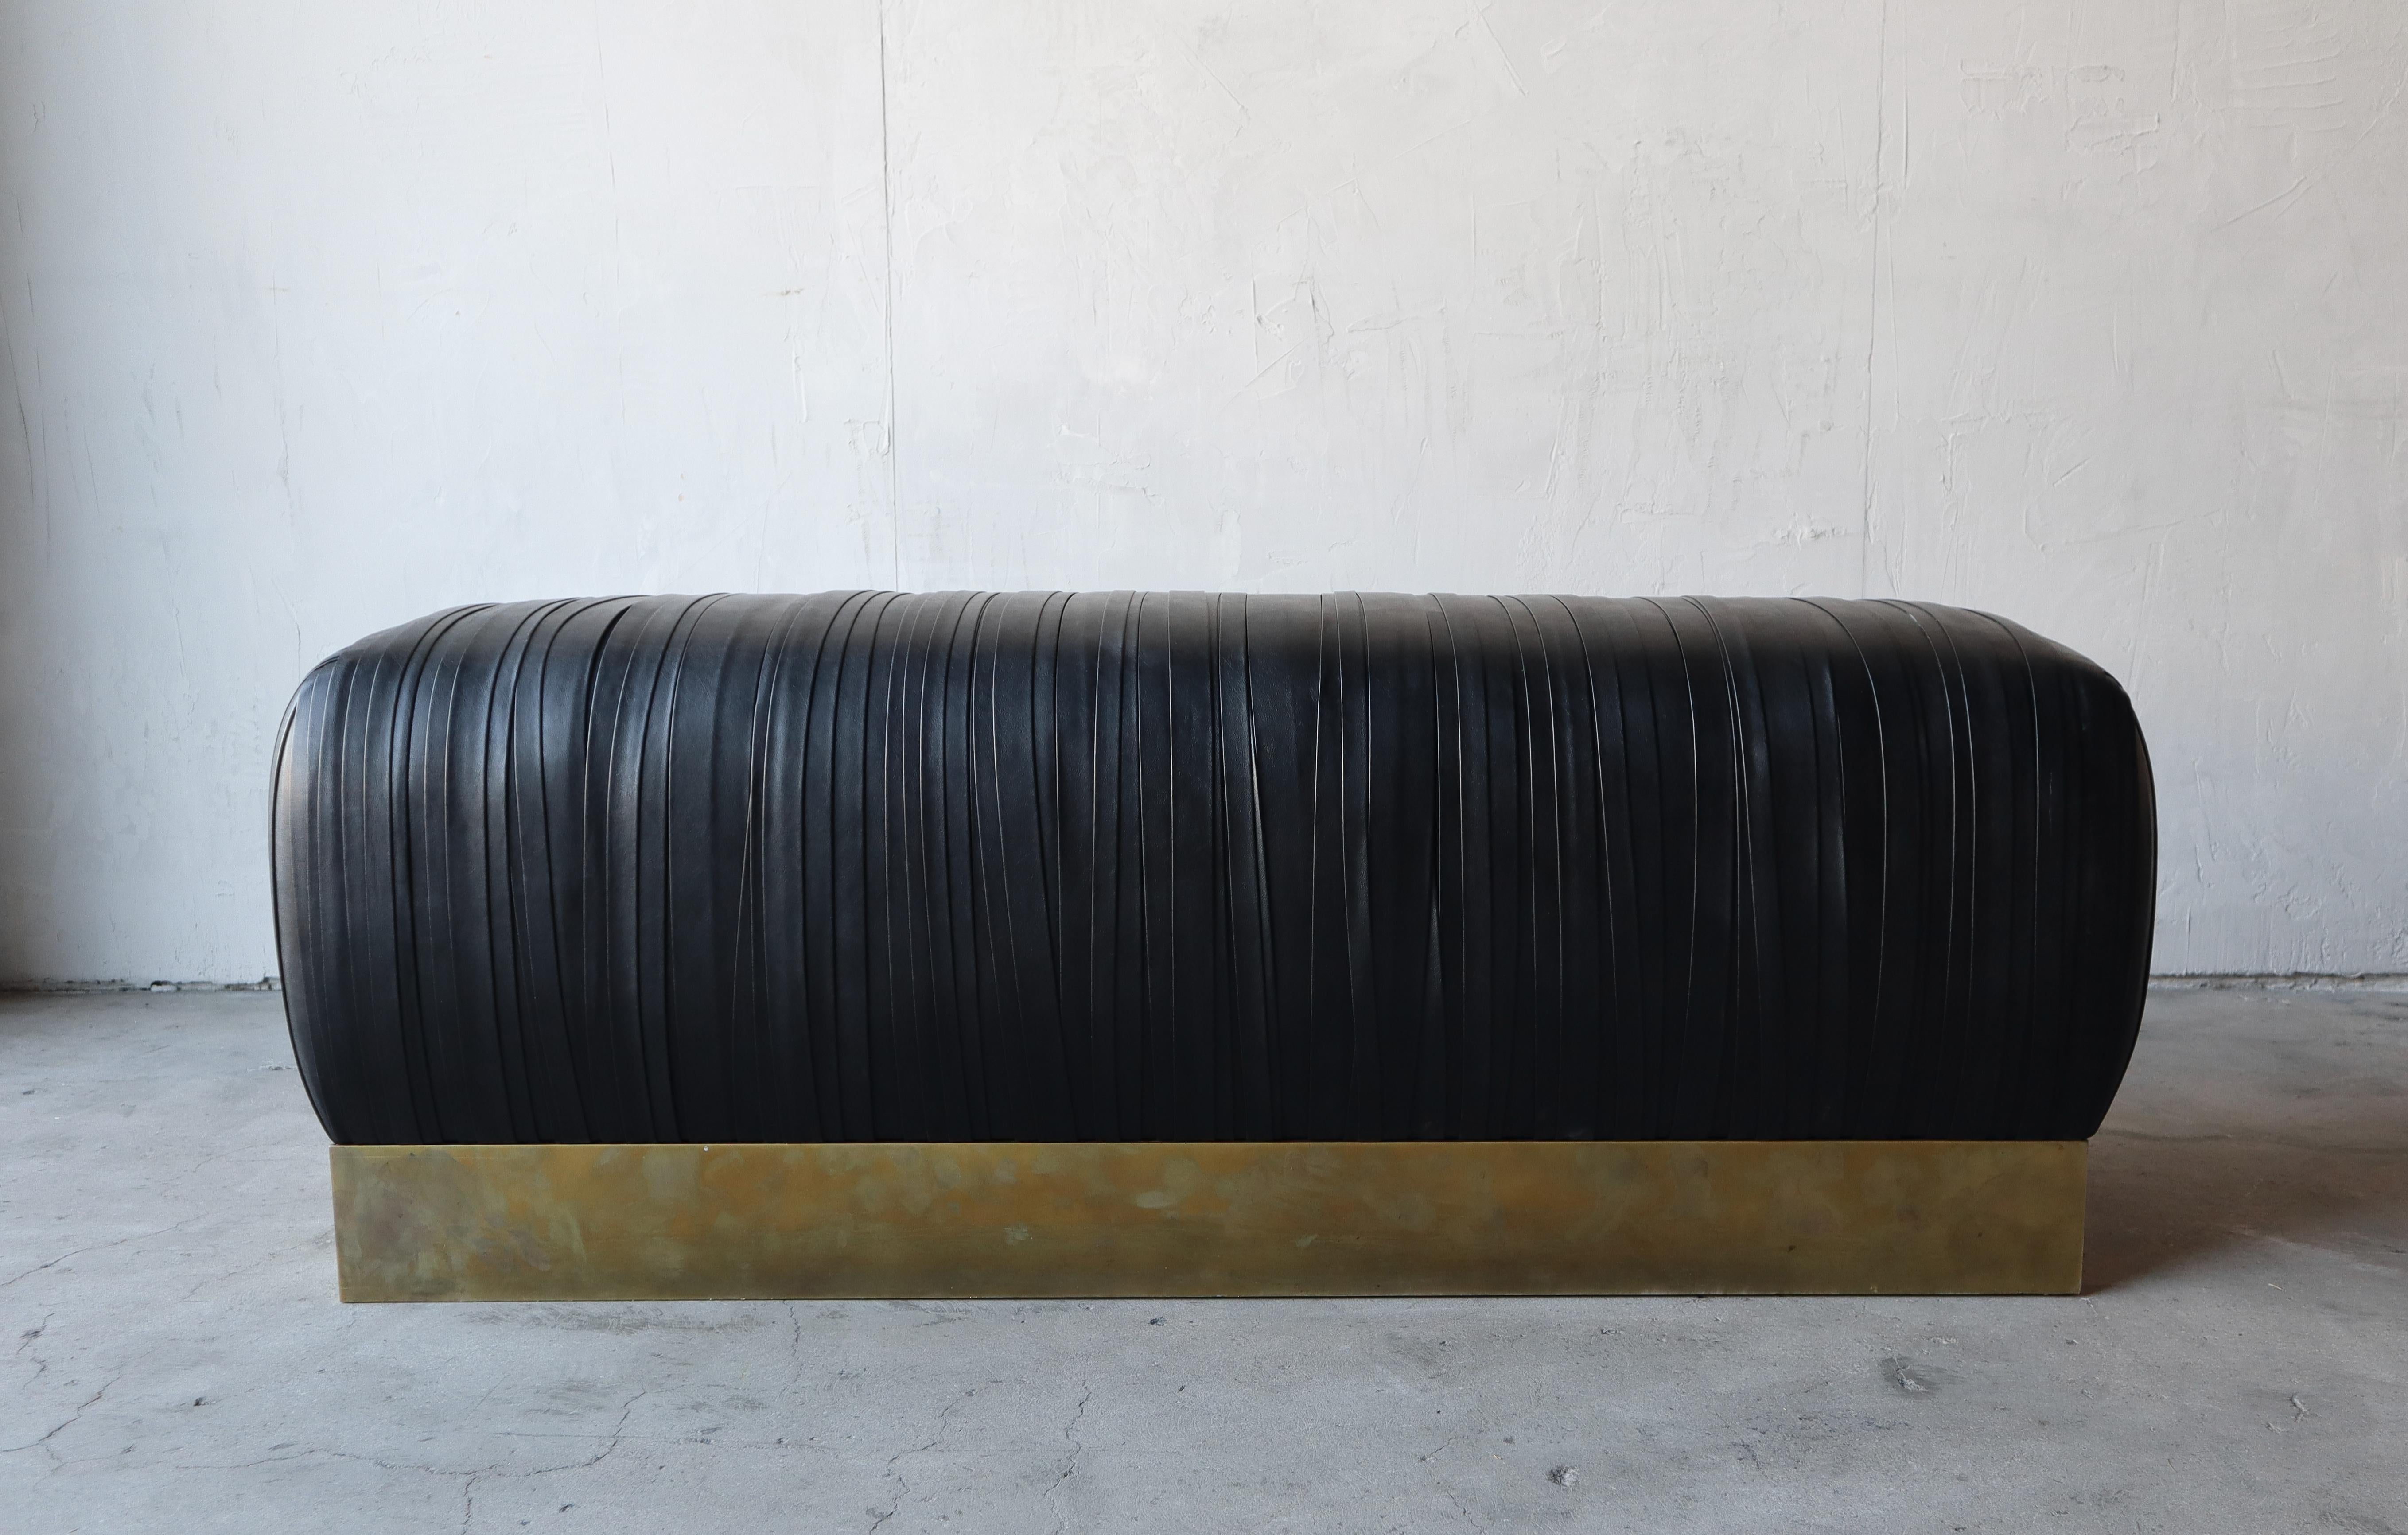 Stylish and substantial strapped black leather and brass plinth benches (2 available}. The benches are beautiful and would add so much class to any space. They are perfect almost anywhere, entry, foot of a bed or as additional seating in any room,